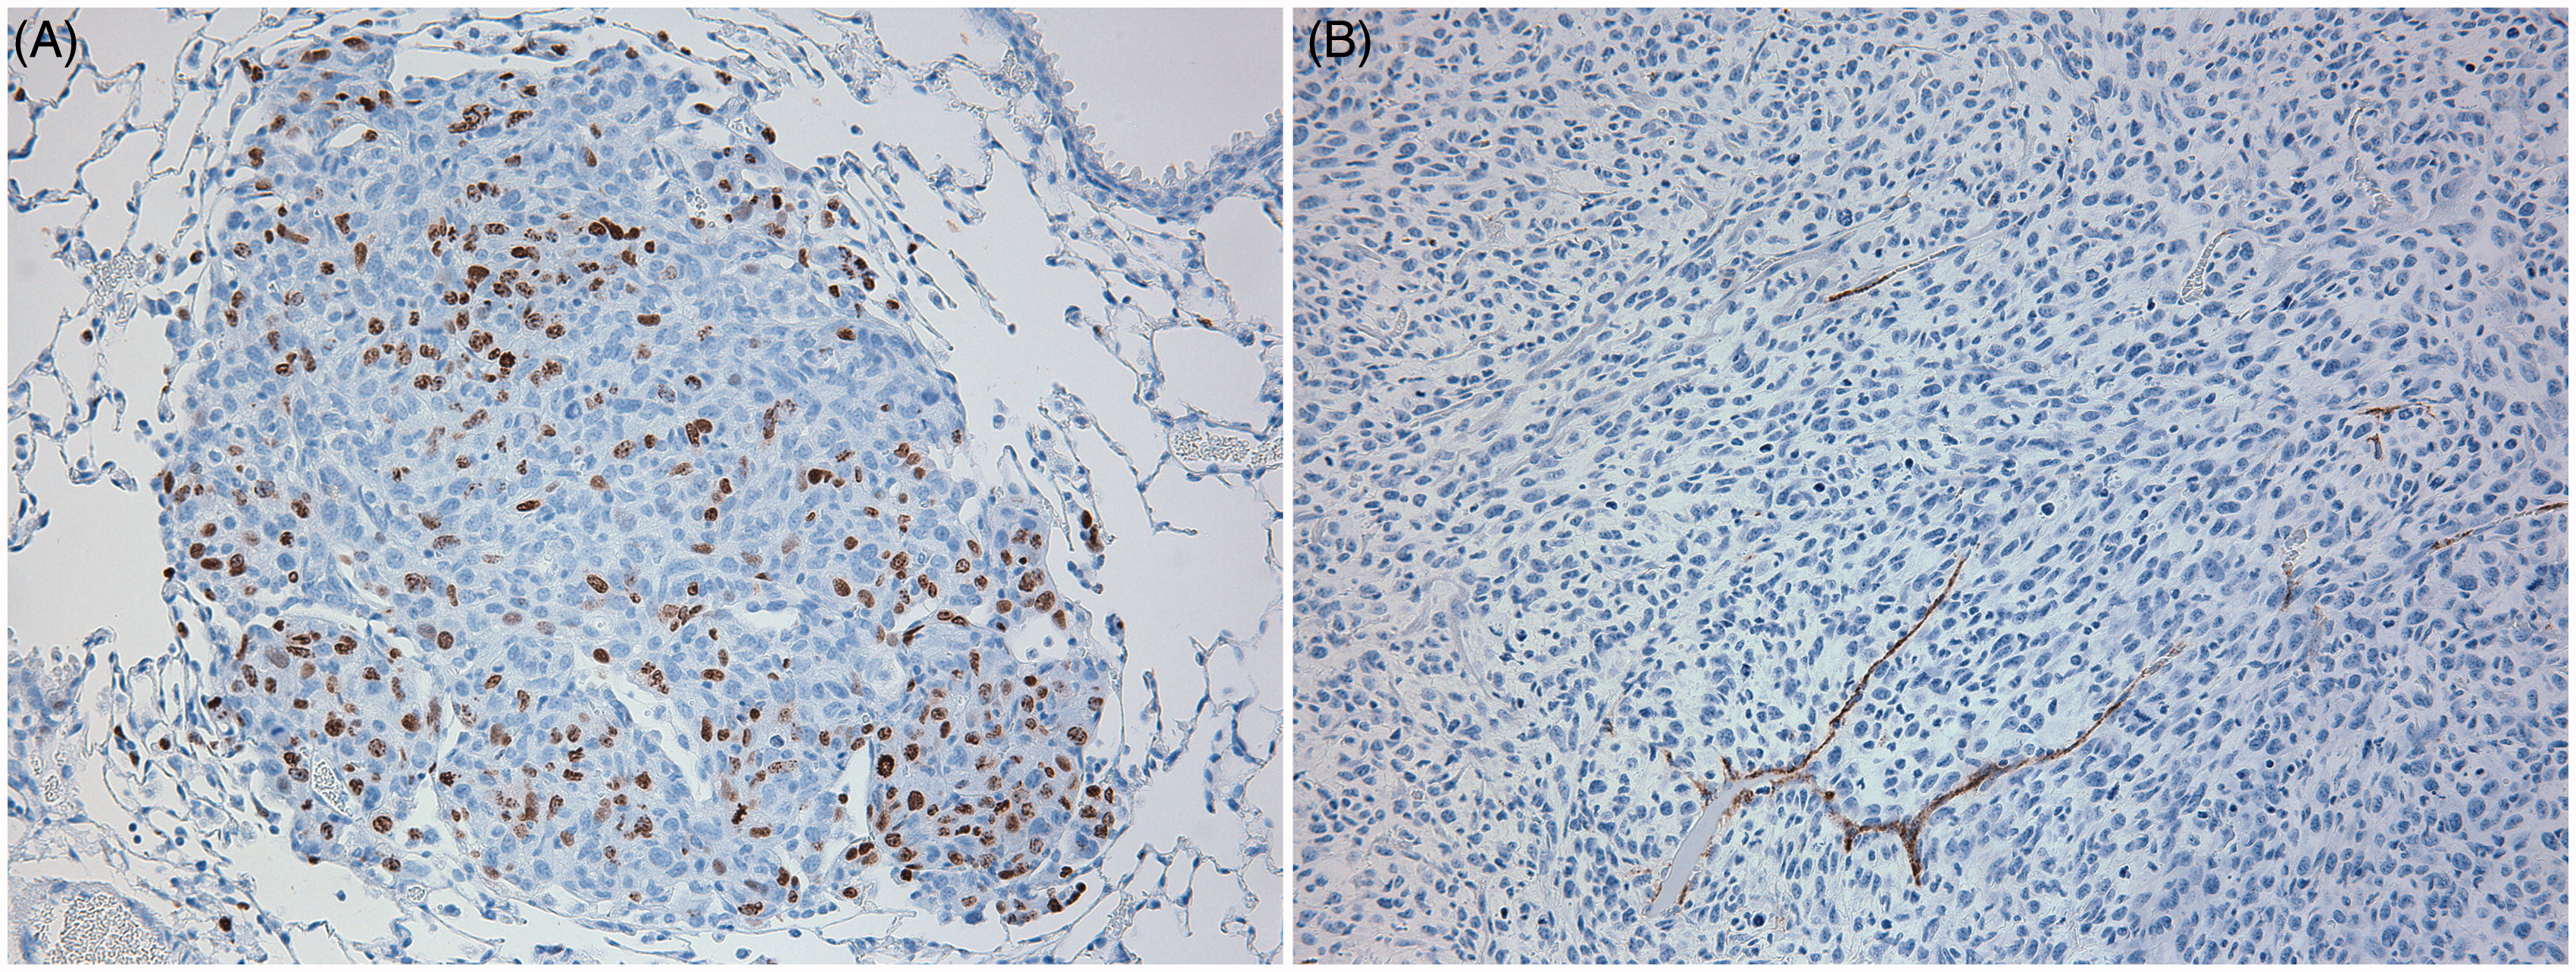 Figure 5. Representative IHC images of SCC VII cells in lung, (a) IHC for BrdU, (b) IHC for vWF. 20X Magnification.